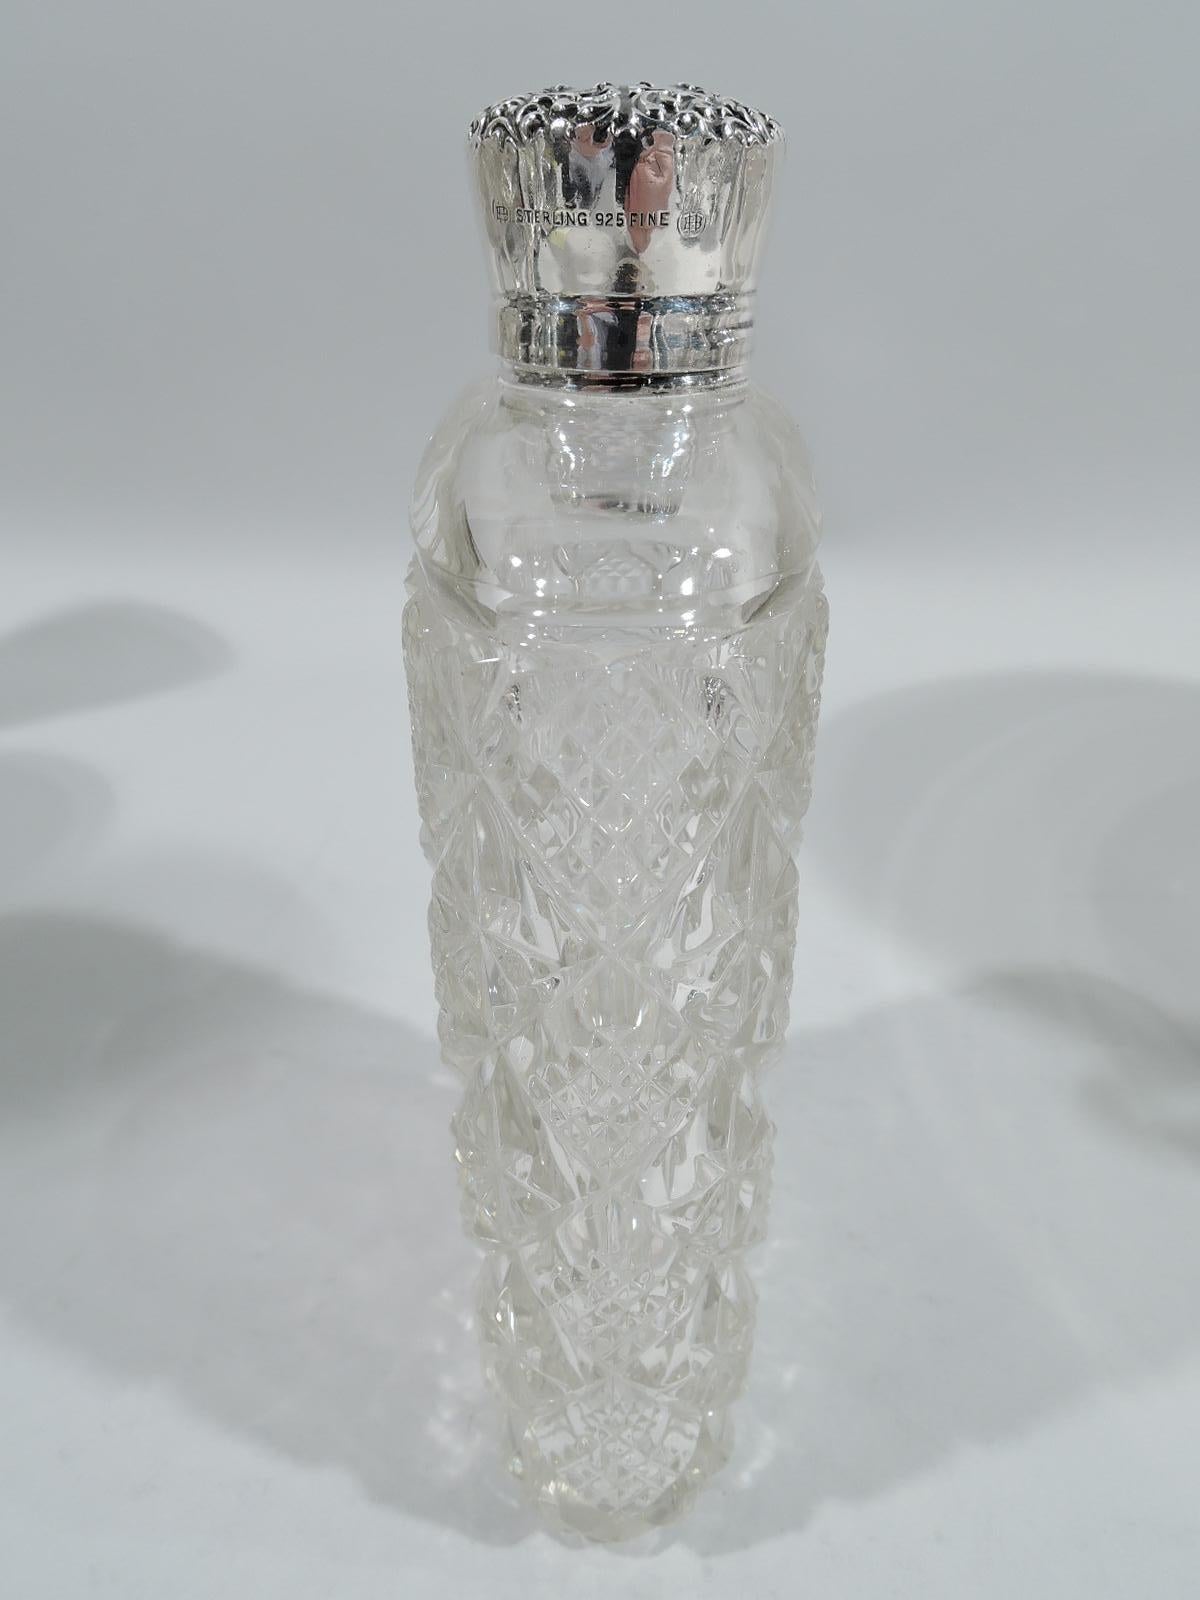 Turn-of-the-century sterling silver and brilliant-cut glass flask Made by Unger Bros in Newark. Rectilinear with curved sides and diaper inset with alternating paterae and diaper. Threaded sterling silver collar and cover with plain sides and